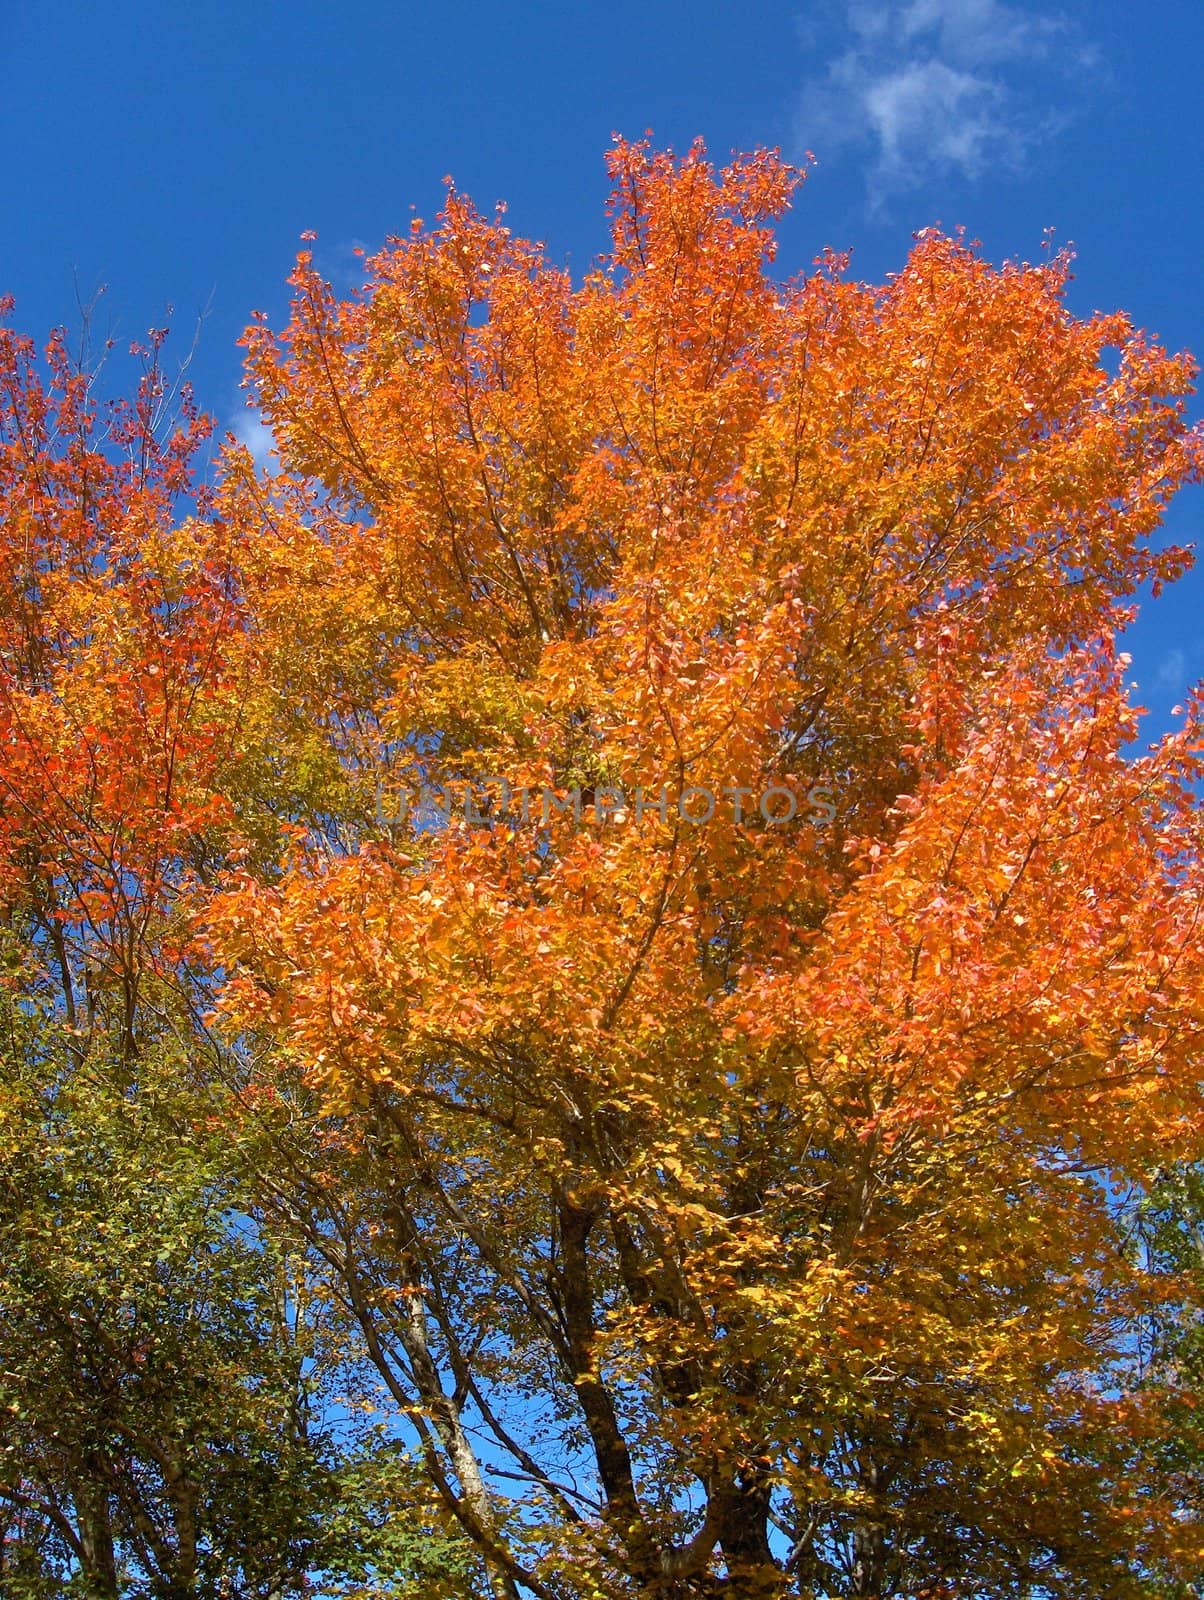 A colorful tree in autumn against a blue sky.